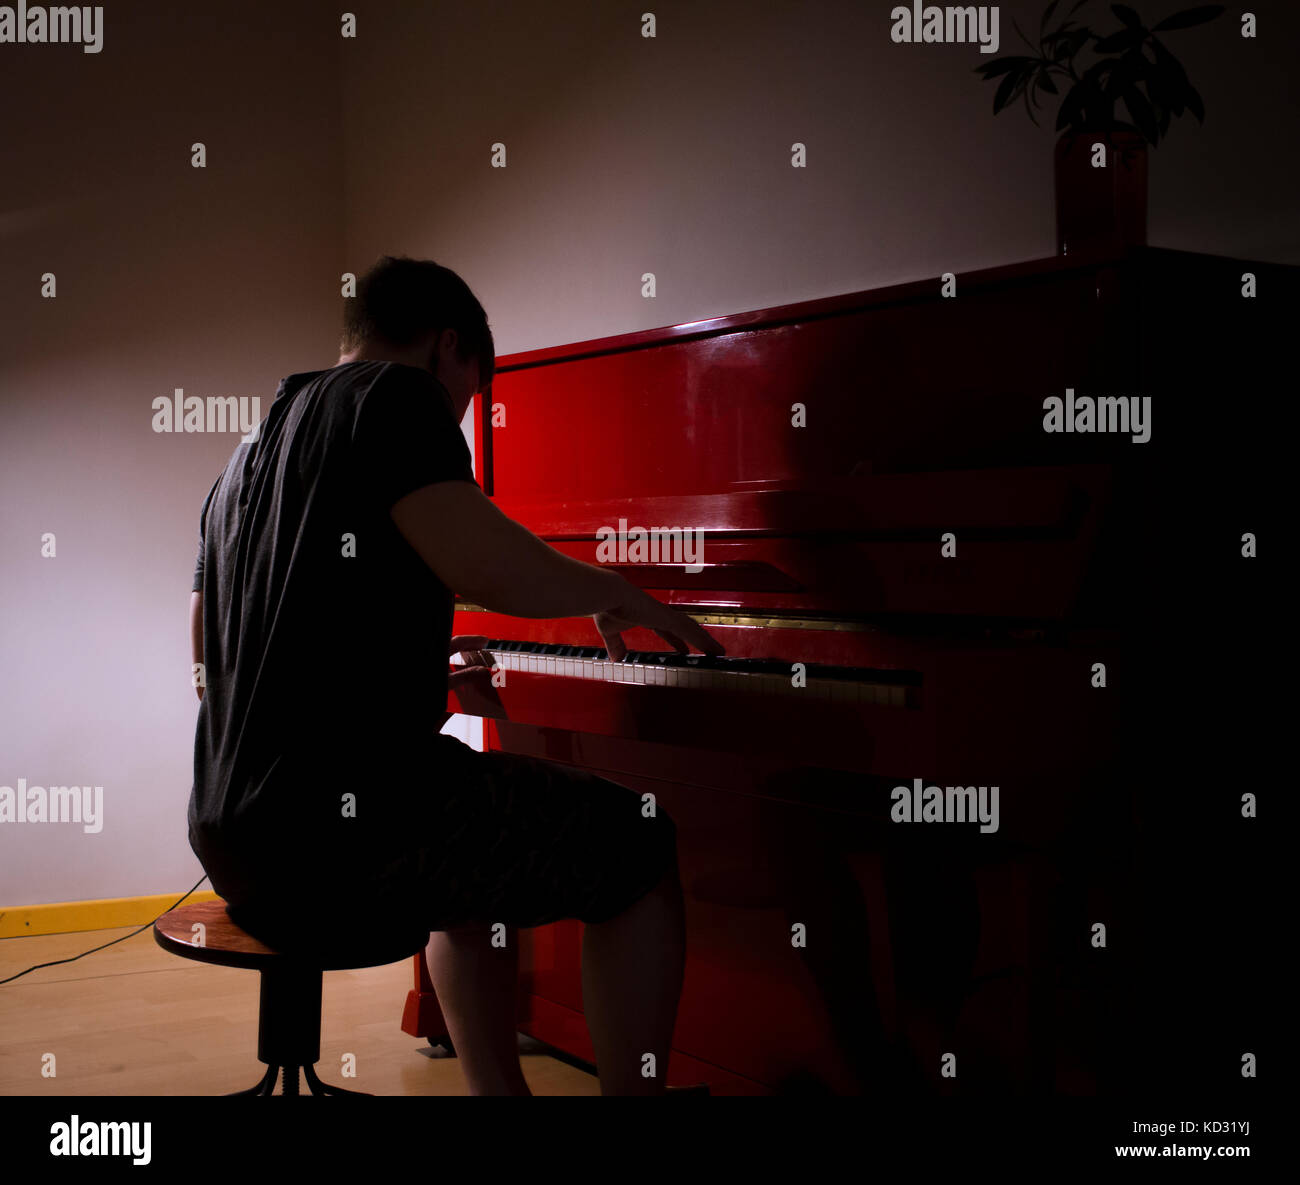 Man playing piano in dimly lit room Stock Photo